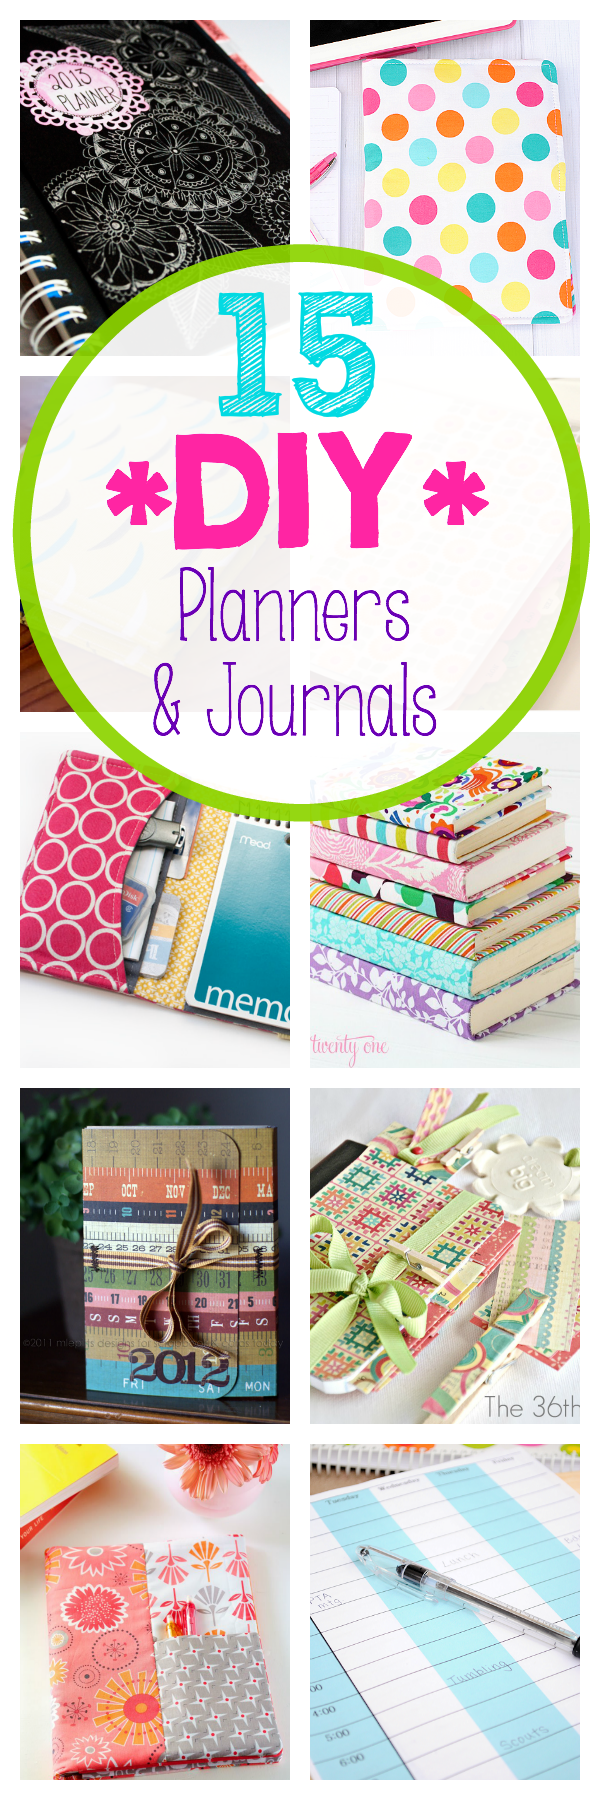 \"DIYPlanners\"